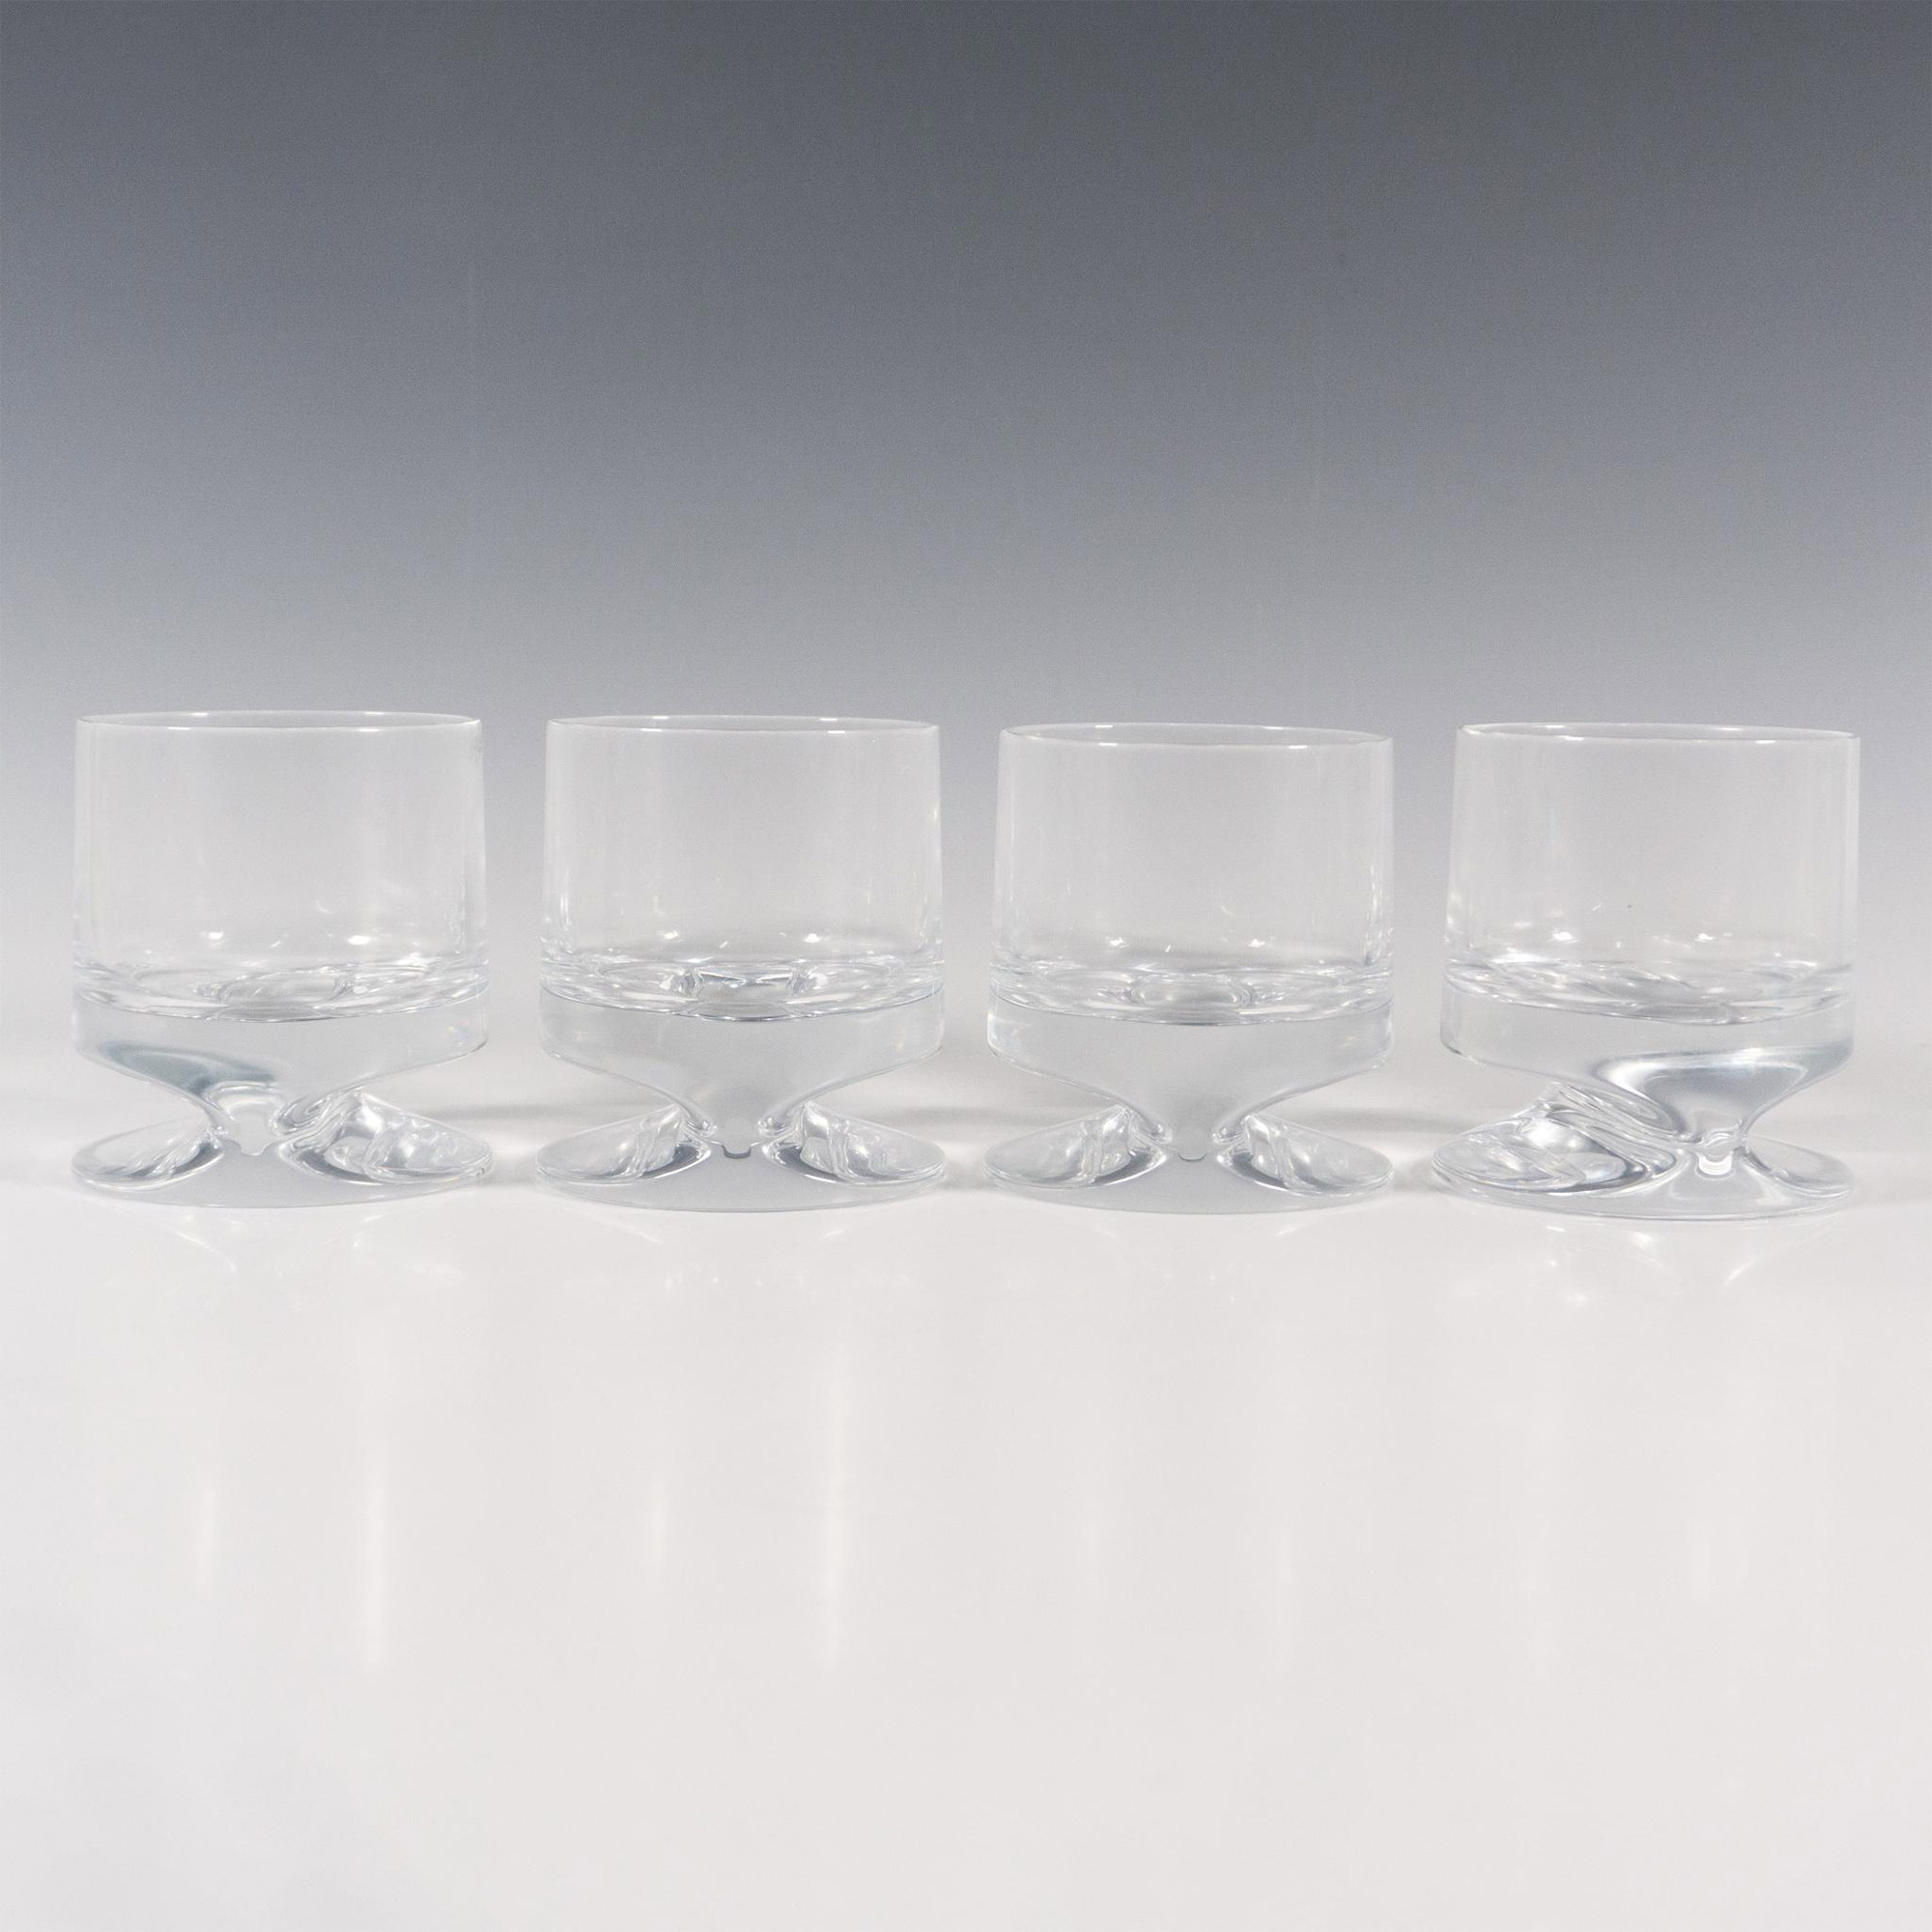 Set of 4 Nambe Glasses, Groove Double Old Fashion - Image 2 of 4